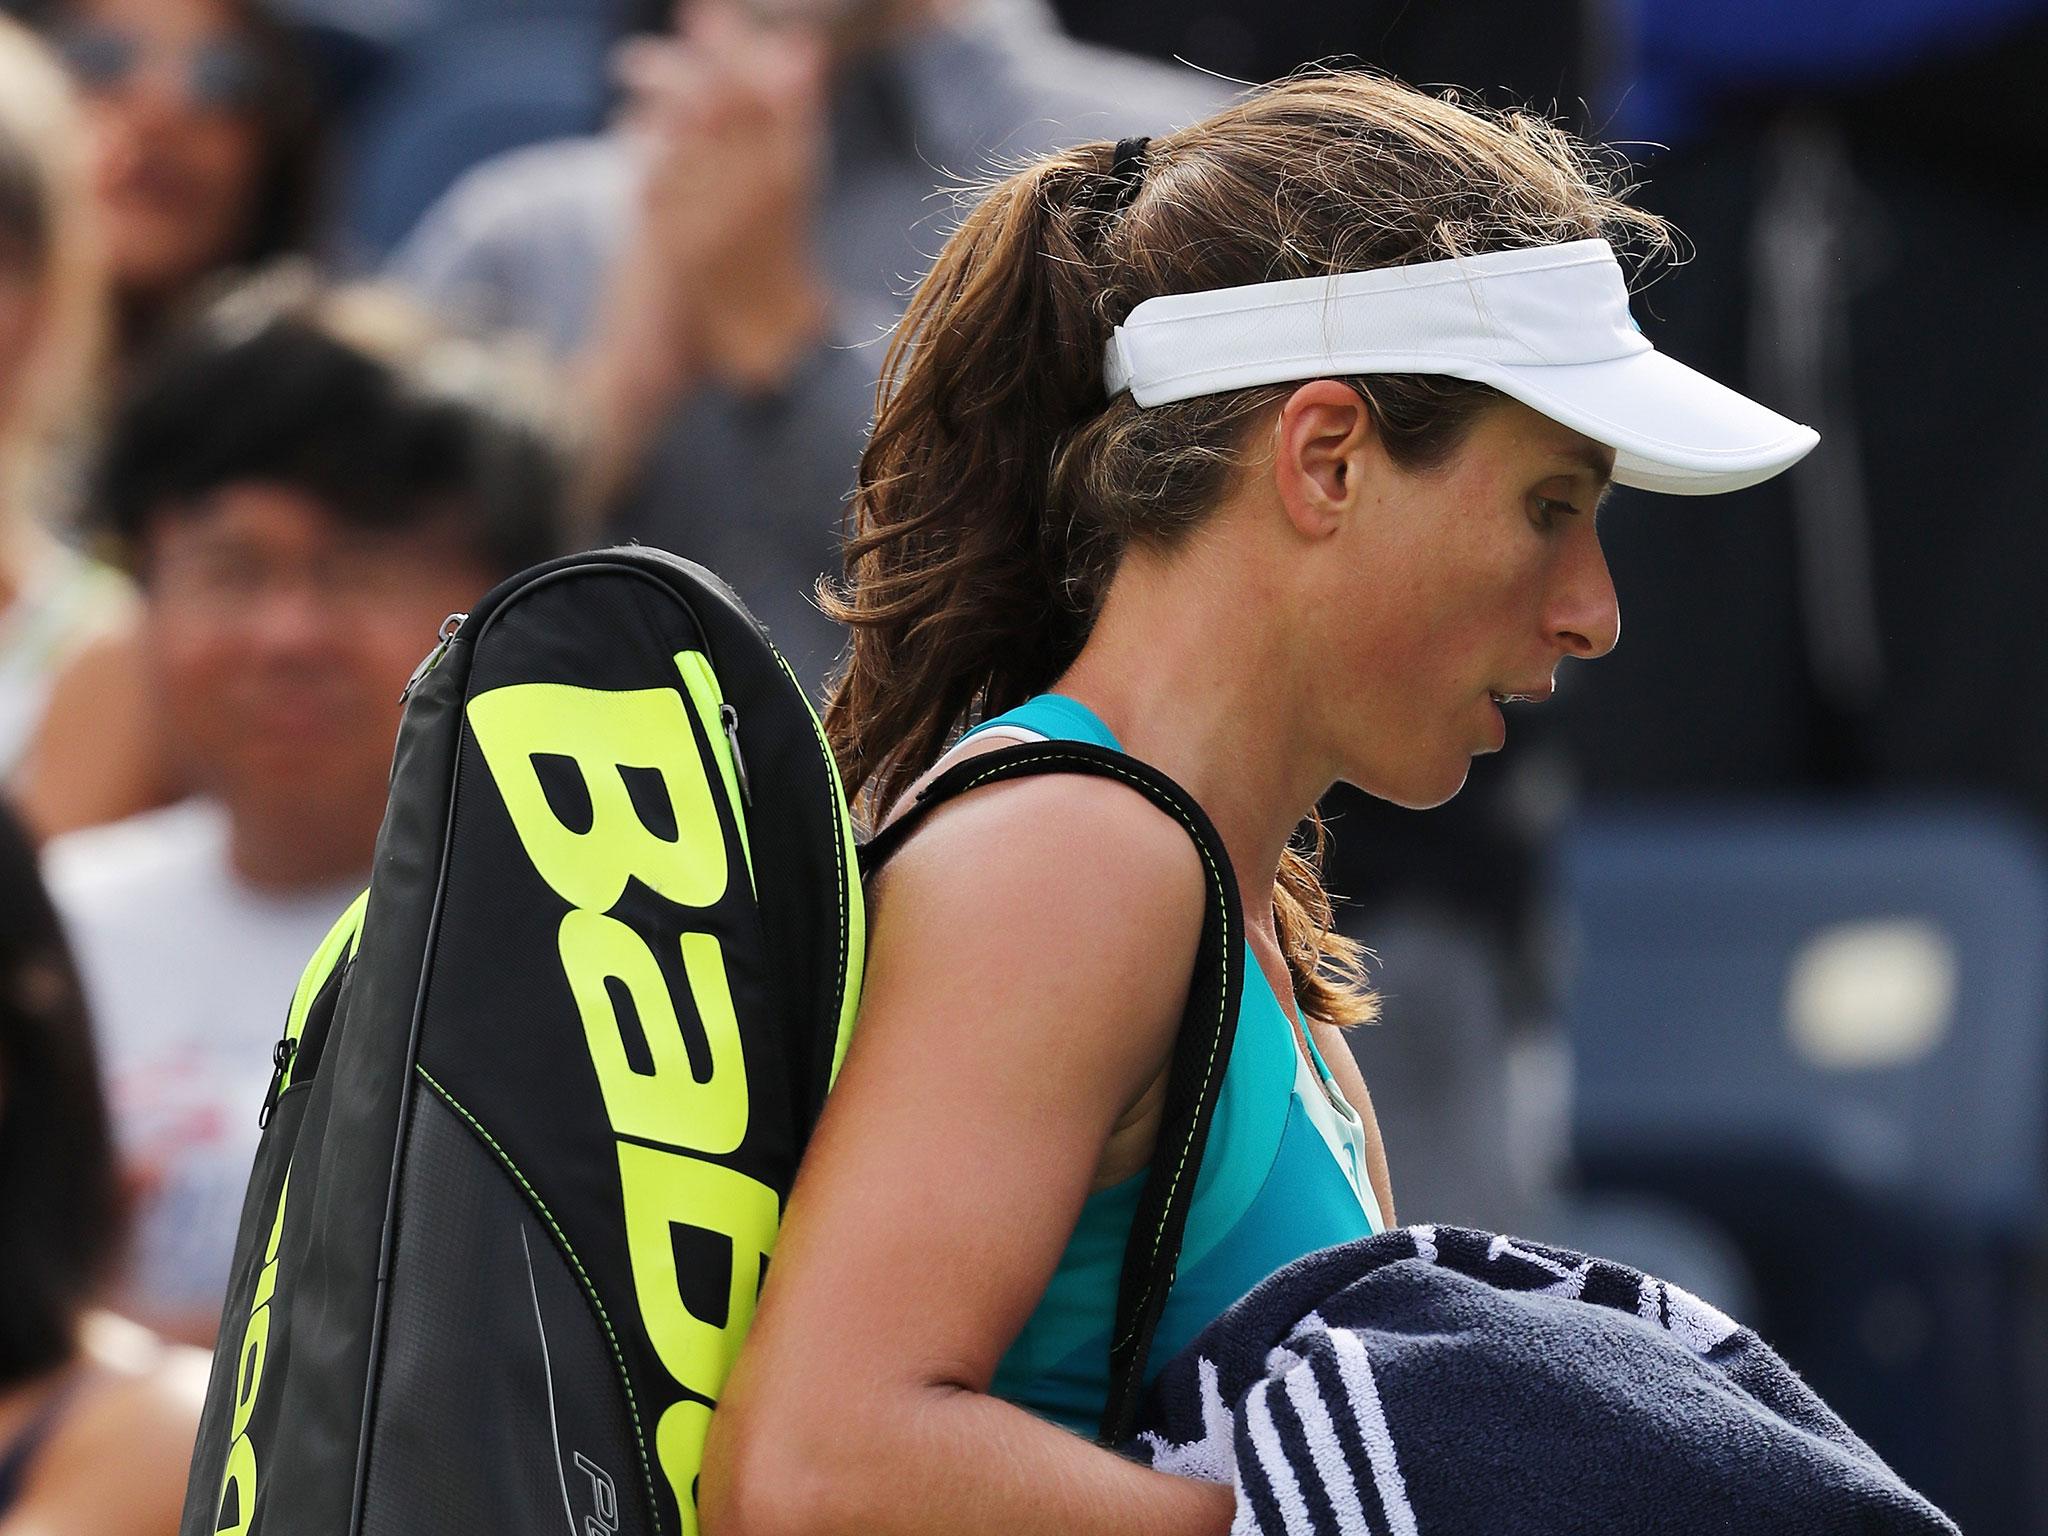 Jo Konta suffered disappointment in New York to end her Grand Slam year on a low